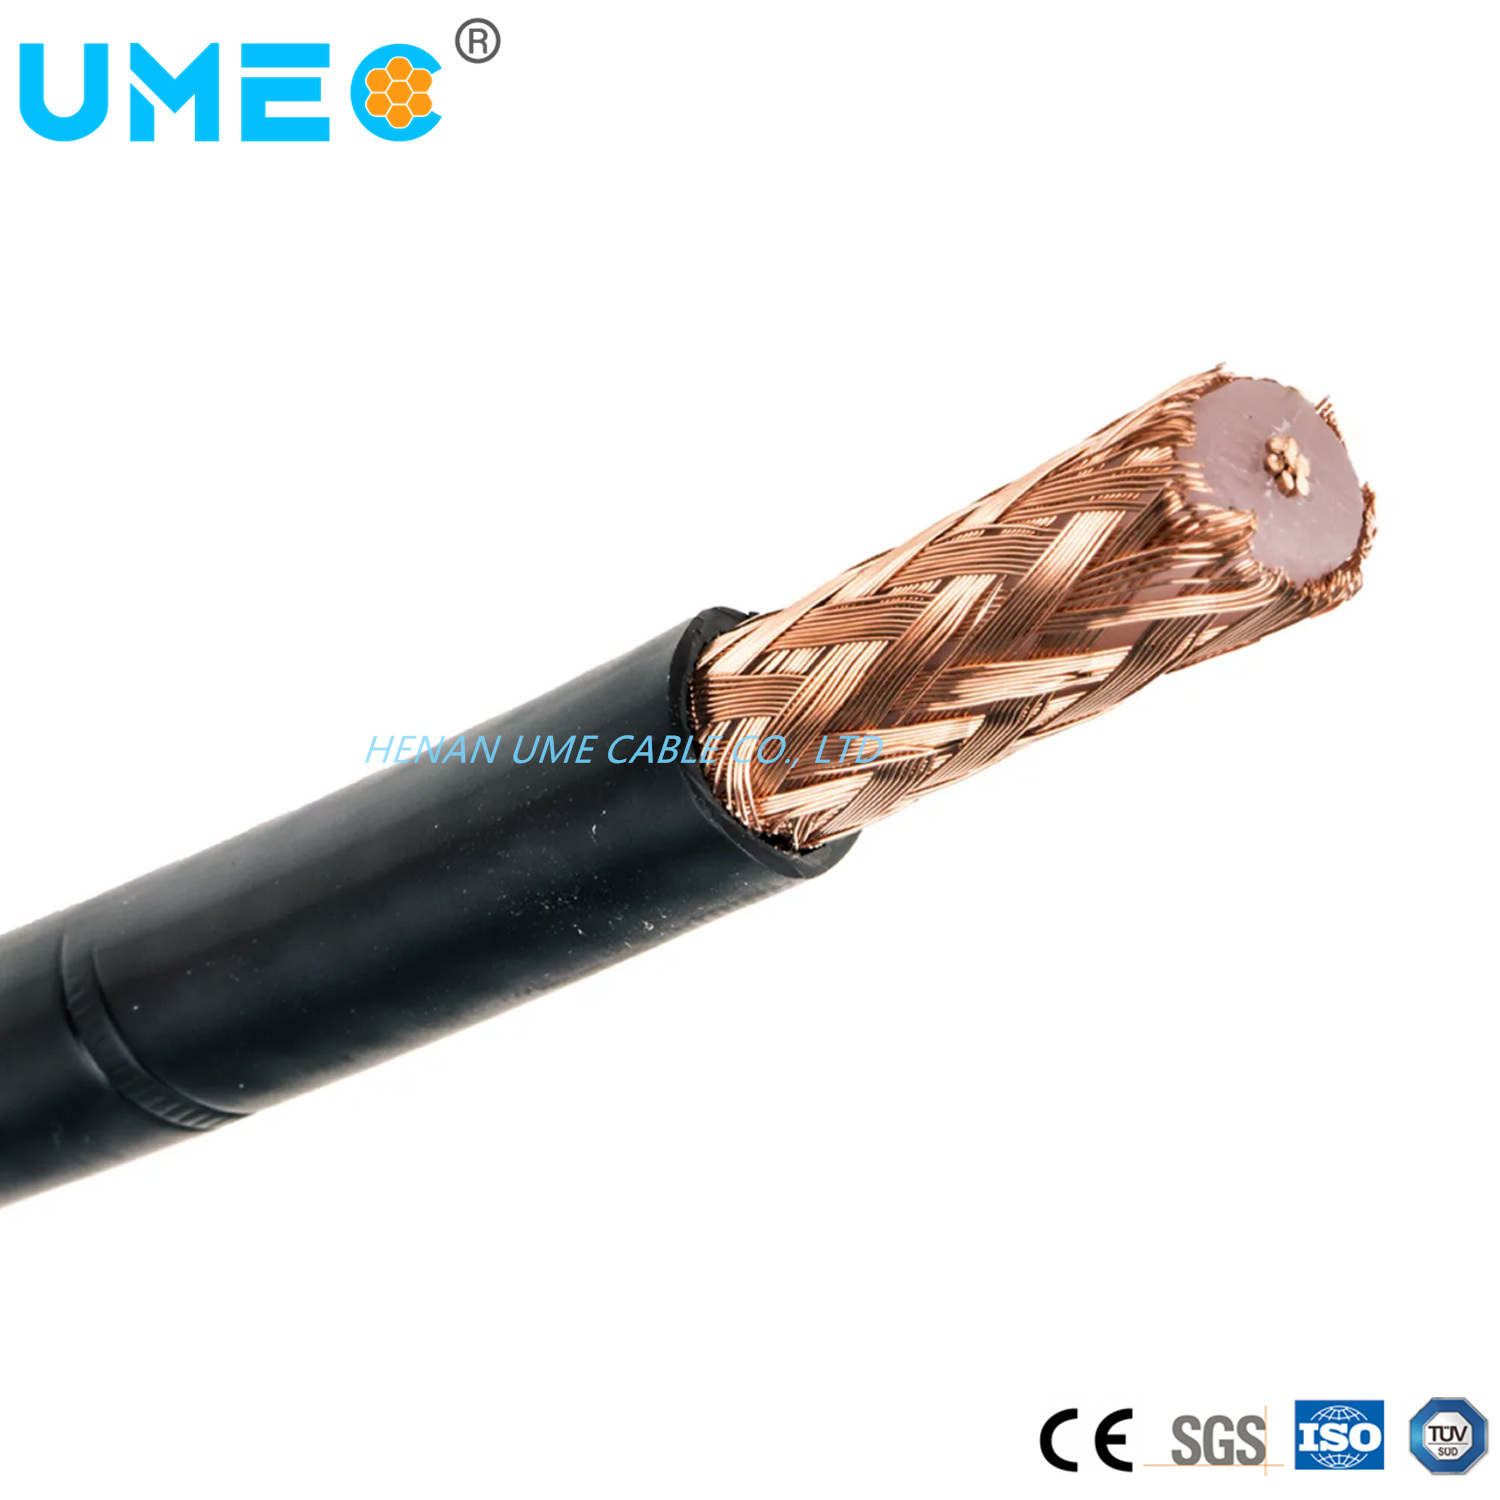 Wholesale RG6 Coaxial Cable RG6 for CCTV Camera Electric Wire Coaxial Cable Rg-6/U